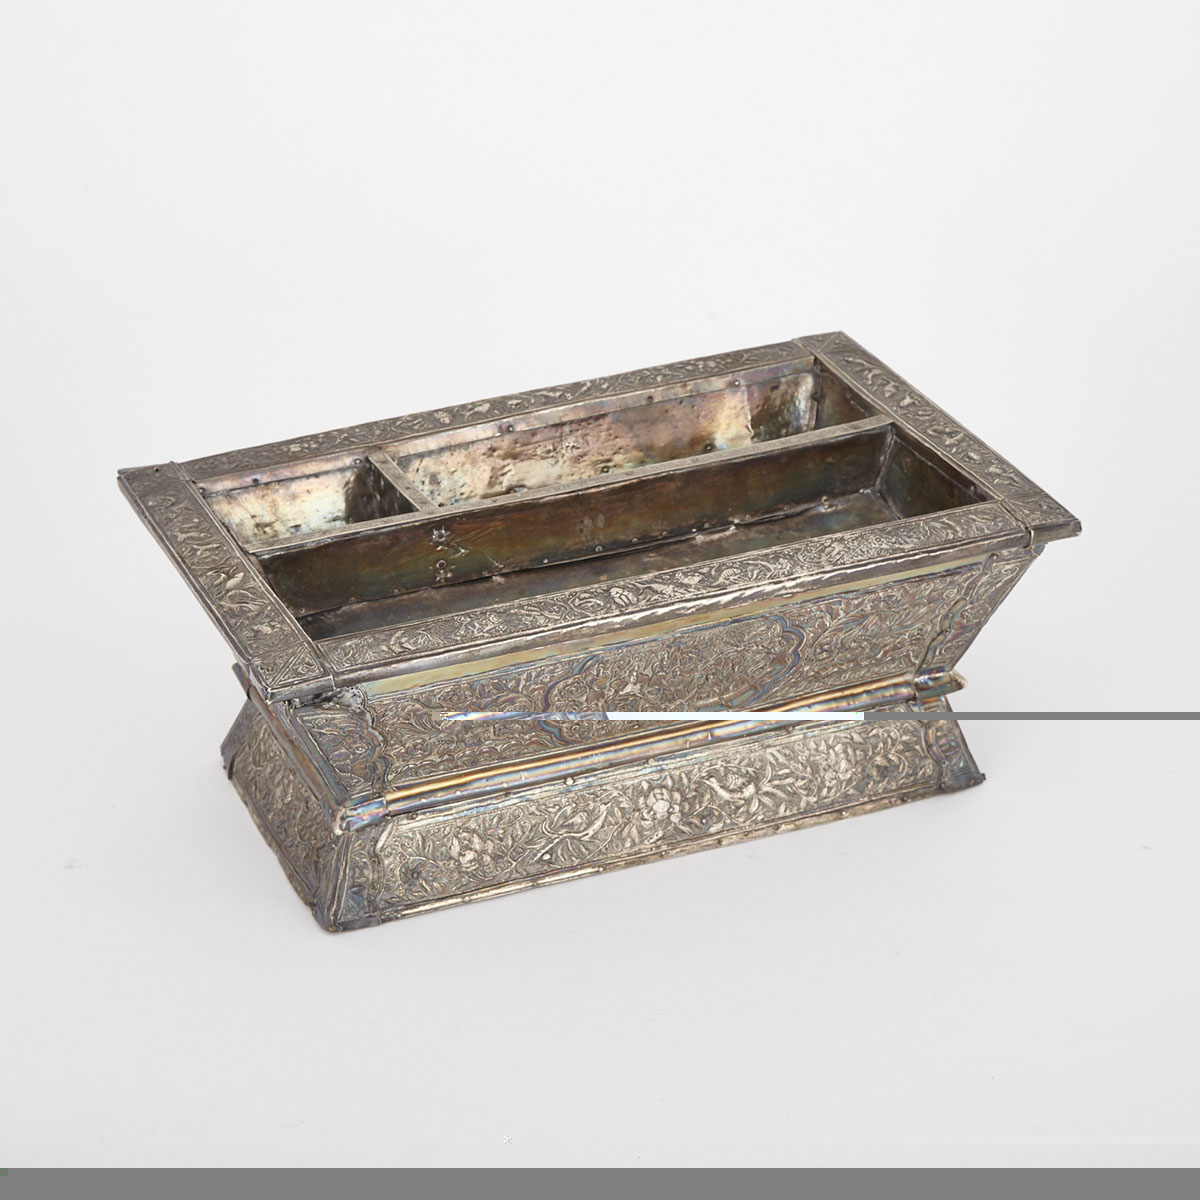 Chinese Export Silver Writing Box, 19th Century